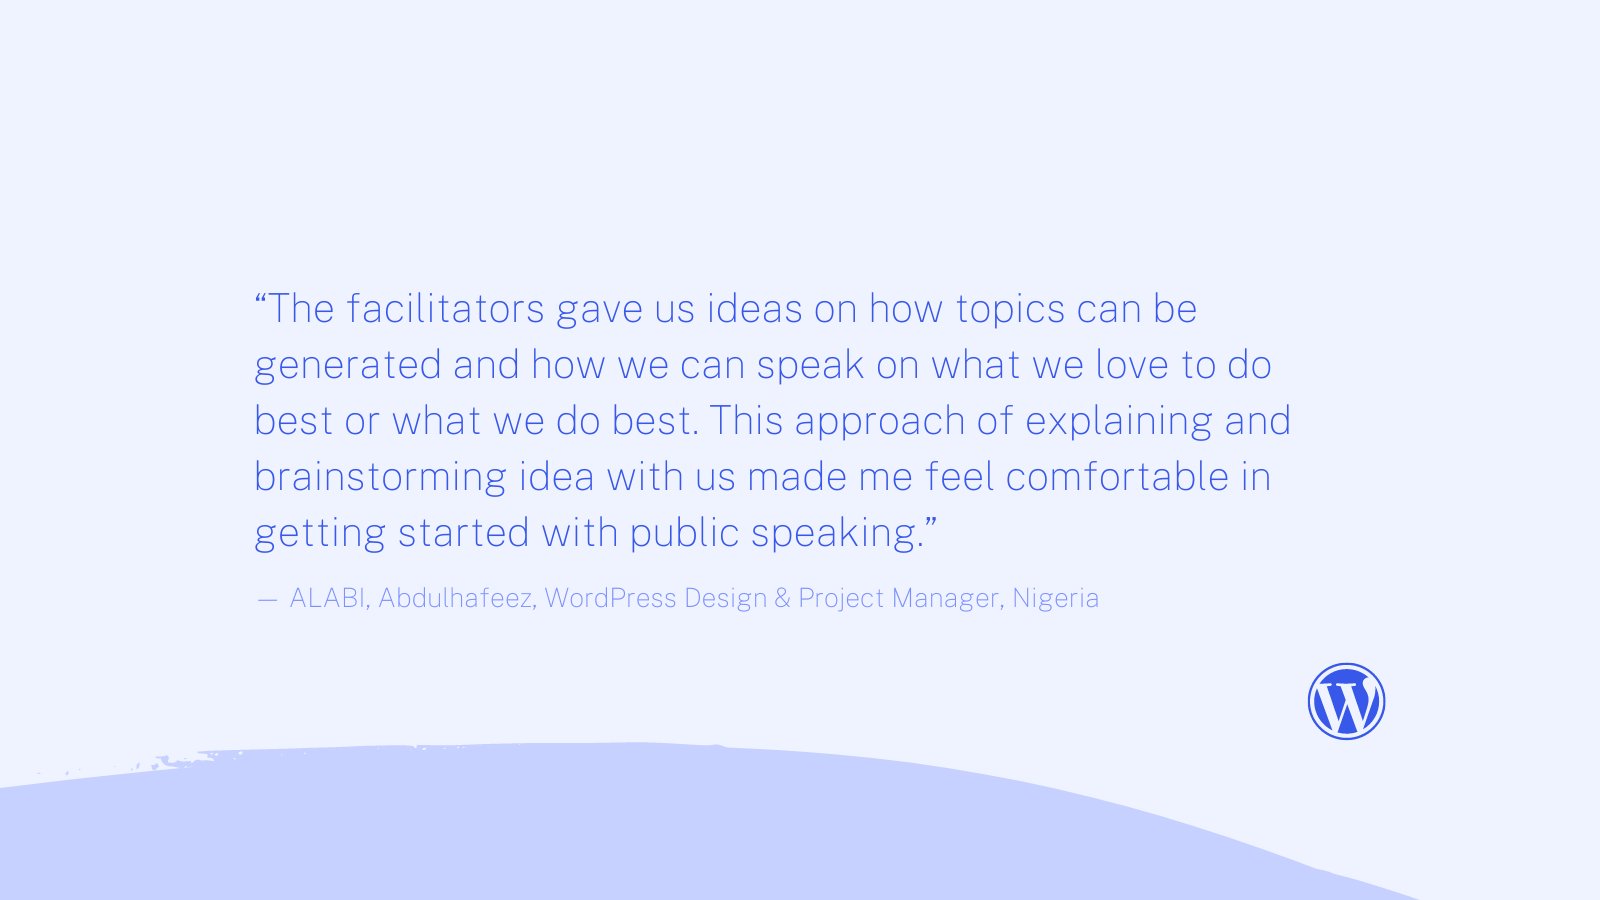 Blue image with text quote: “The facilitators gave us ideas on how topics can be generated and how we can speak on what we love to do best or what we do best. This approach of explaining and brainstorming idea with us made me feel comfortable in getting started with public speaking.” Quote by: ALABI, Abdulhafeez, WordPress Design & Project Manager, Nigeria